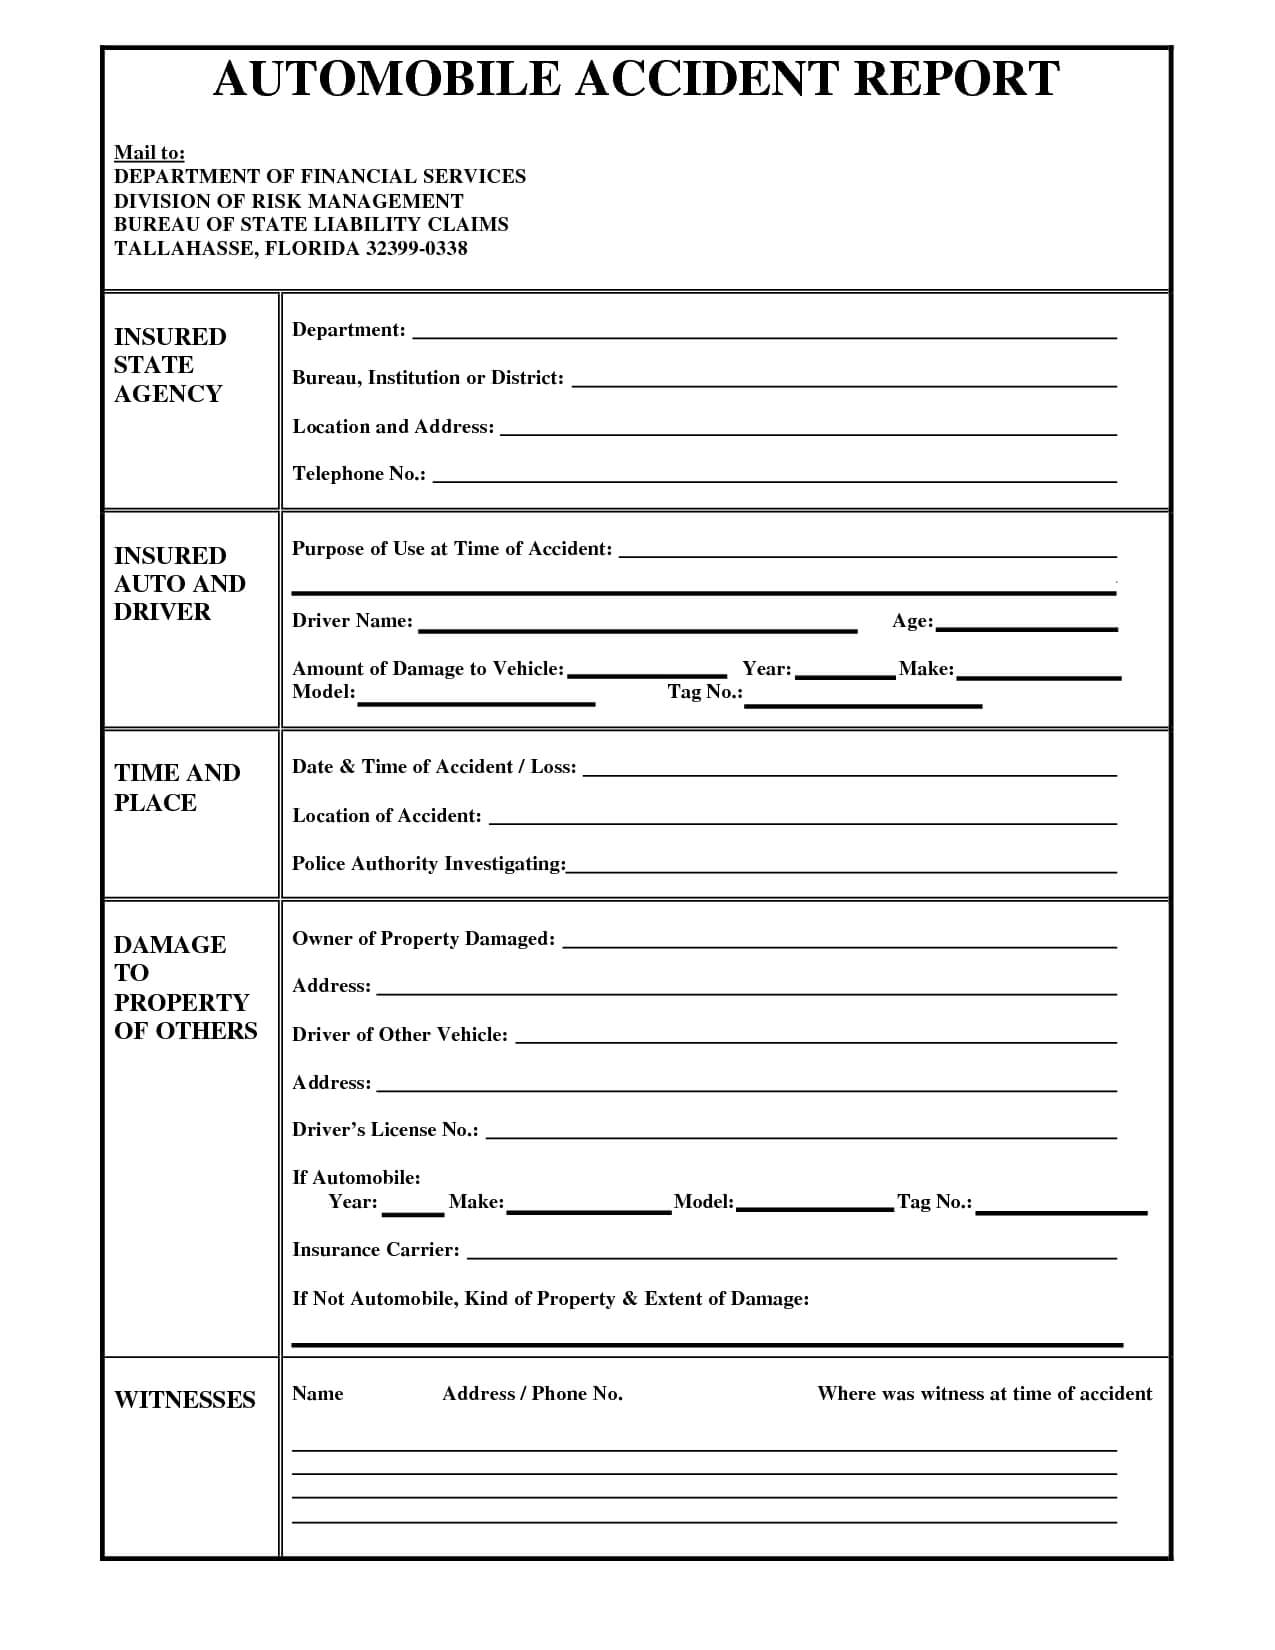 020 Vehicle Accident Report Form Template 504334 Car Throughout Vehicle Accident Report Template